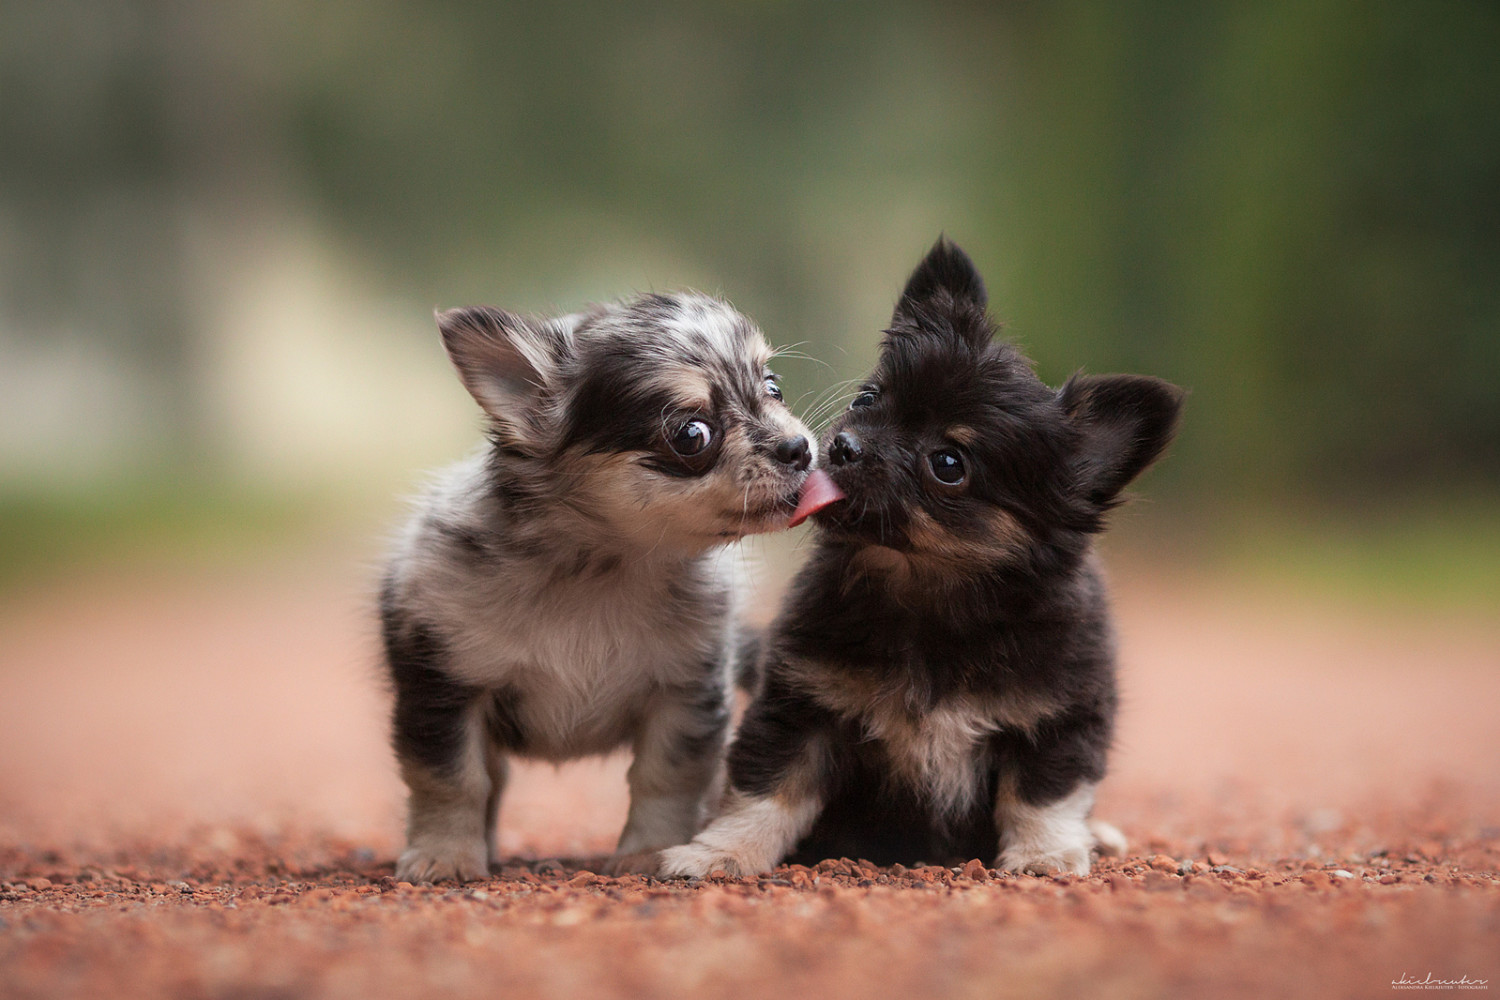 21+ Adorable Puppy Images & Photos on 500px